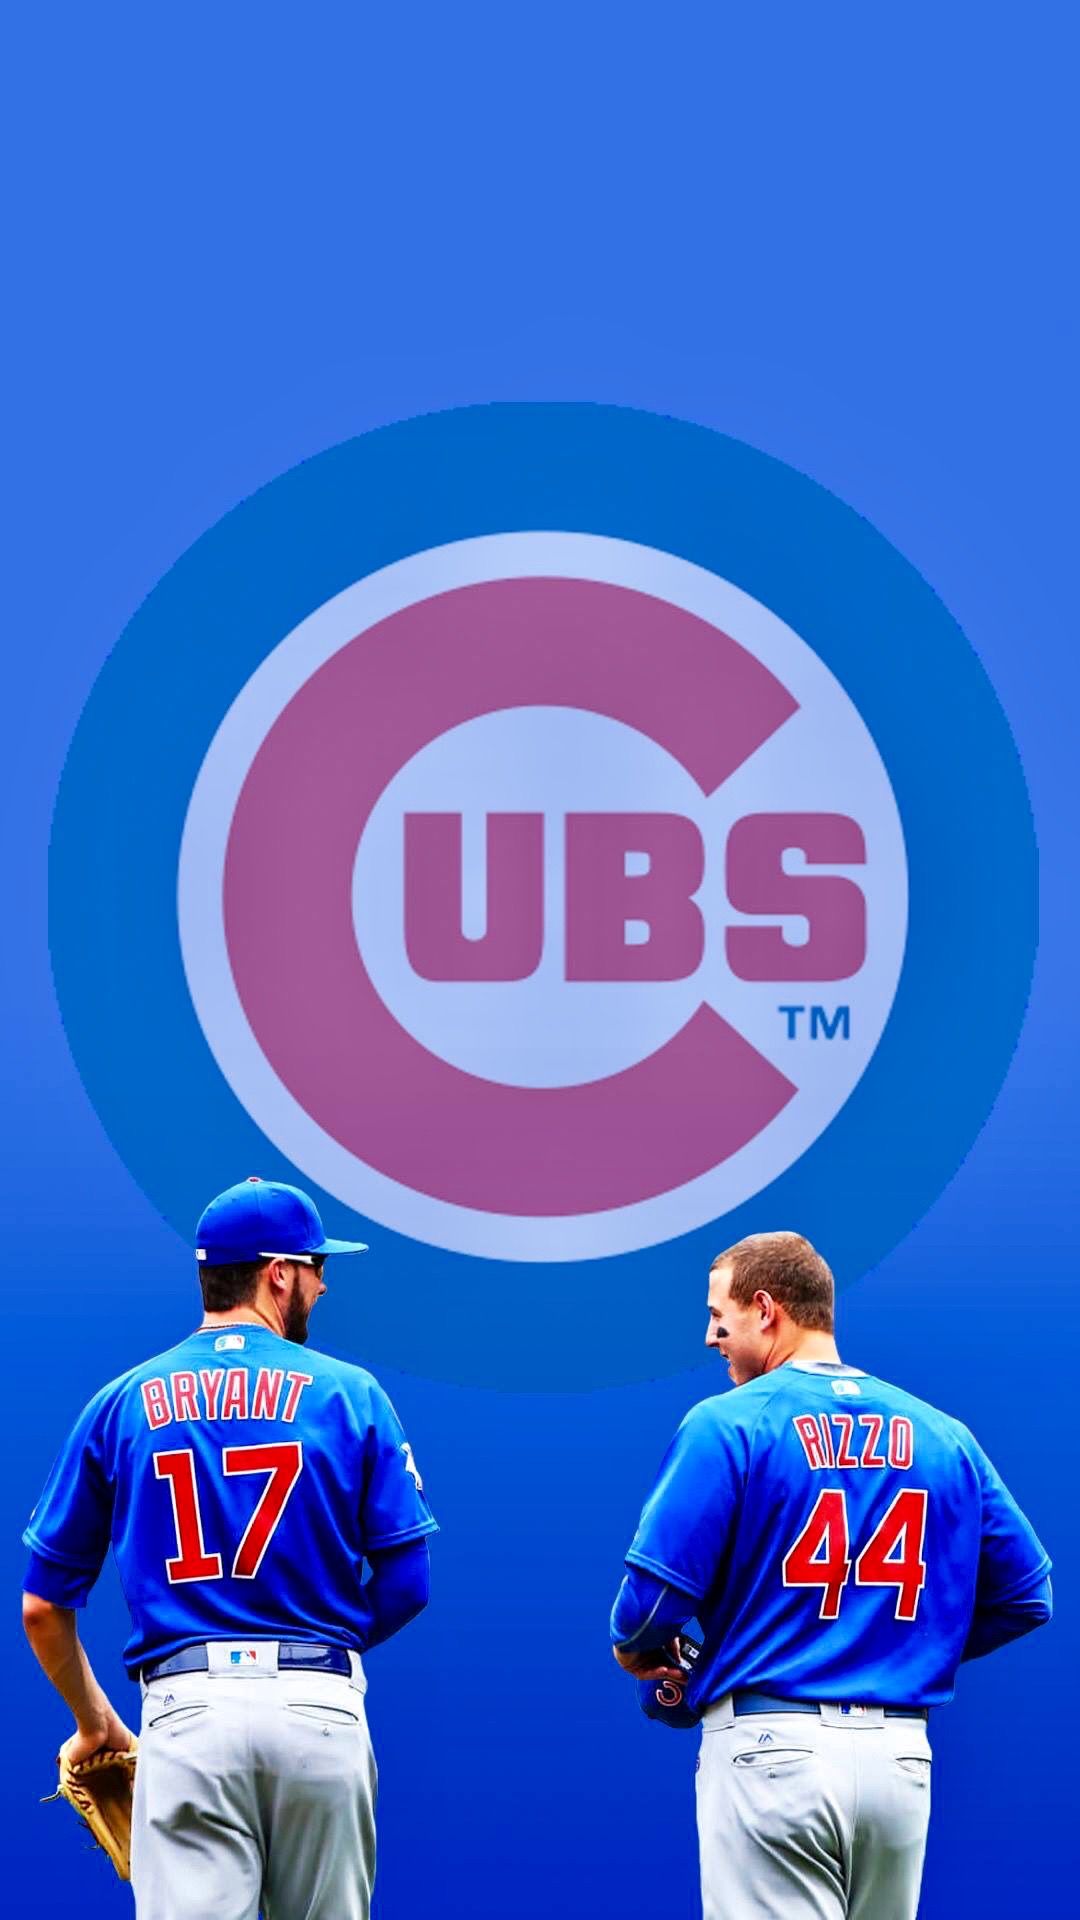 Cubbies. Chicago cubs, Chicago cubs wallpaper, Chicago sports teams